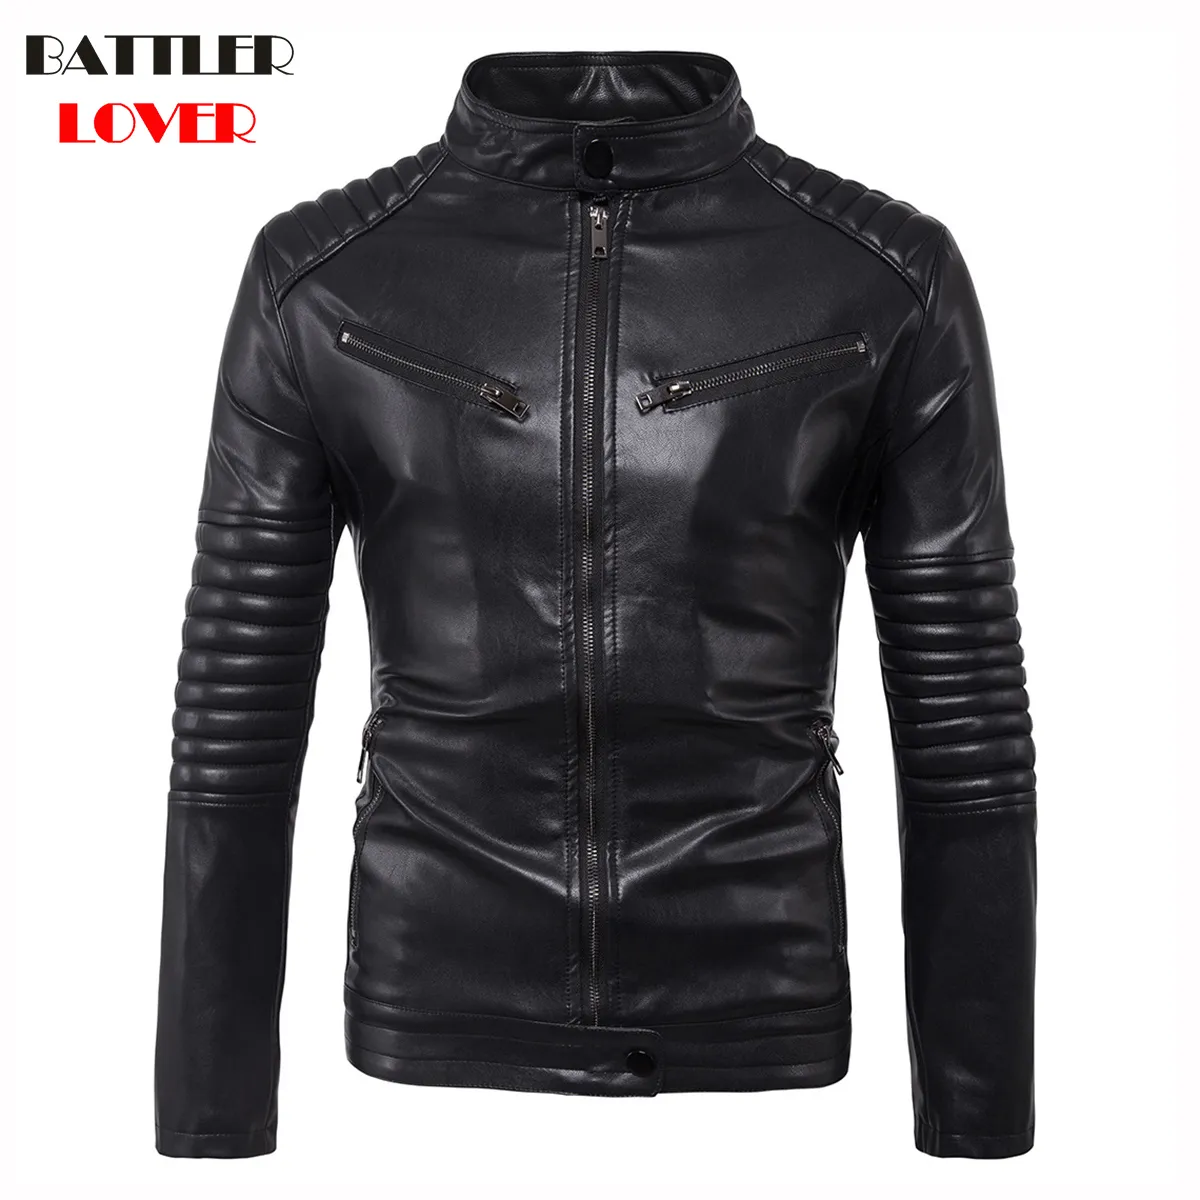  New Mens Leather Coat Winter Faux Leather Warm Outwear Coats Men Punk Parka Jackets Hombre Thick PU Overcoat Brand Clothing